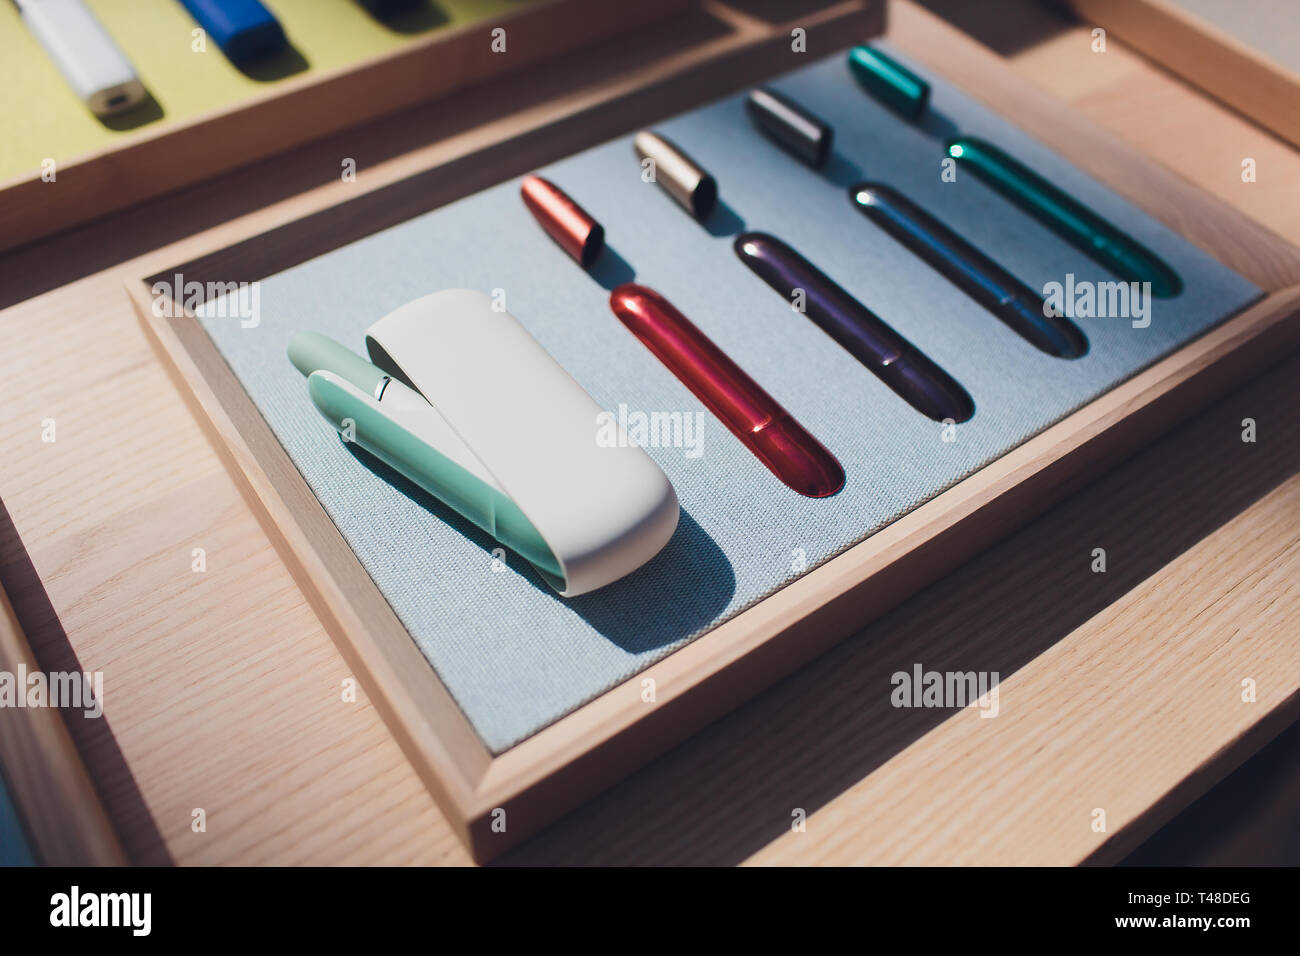 New design. Showcase with a large multi-colored selection System of heating of tobacco. Color devices for smoking. New technology of electronic Stock Photo